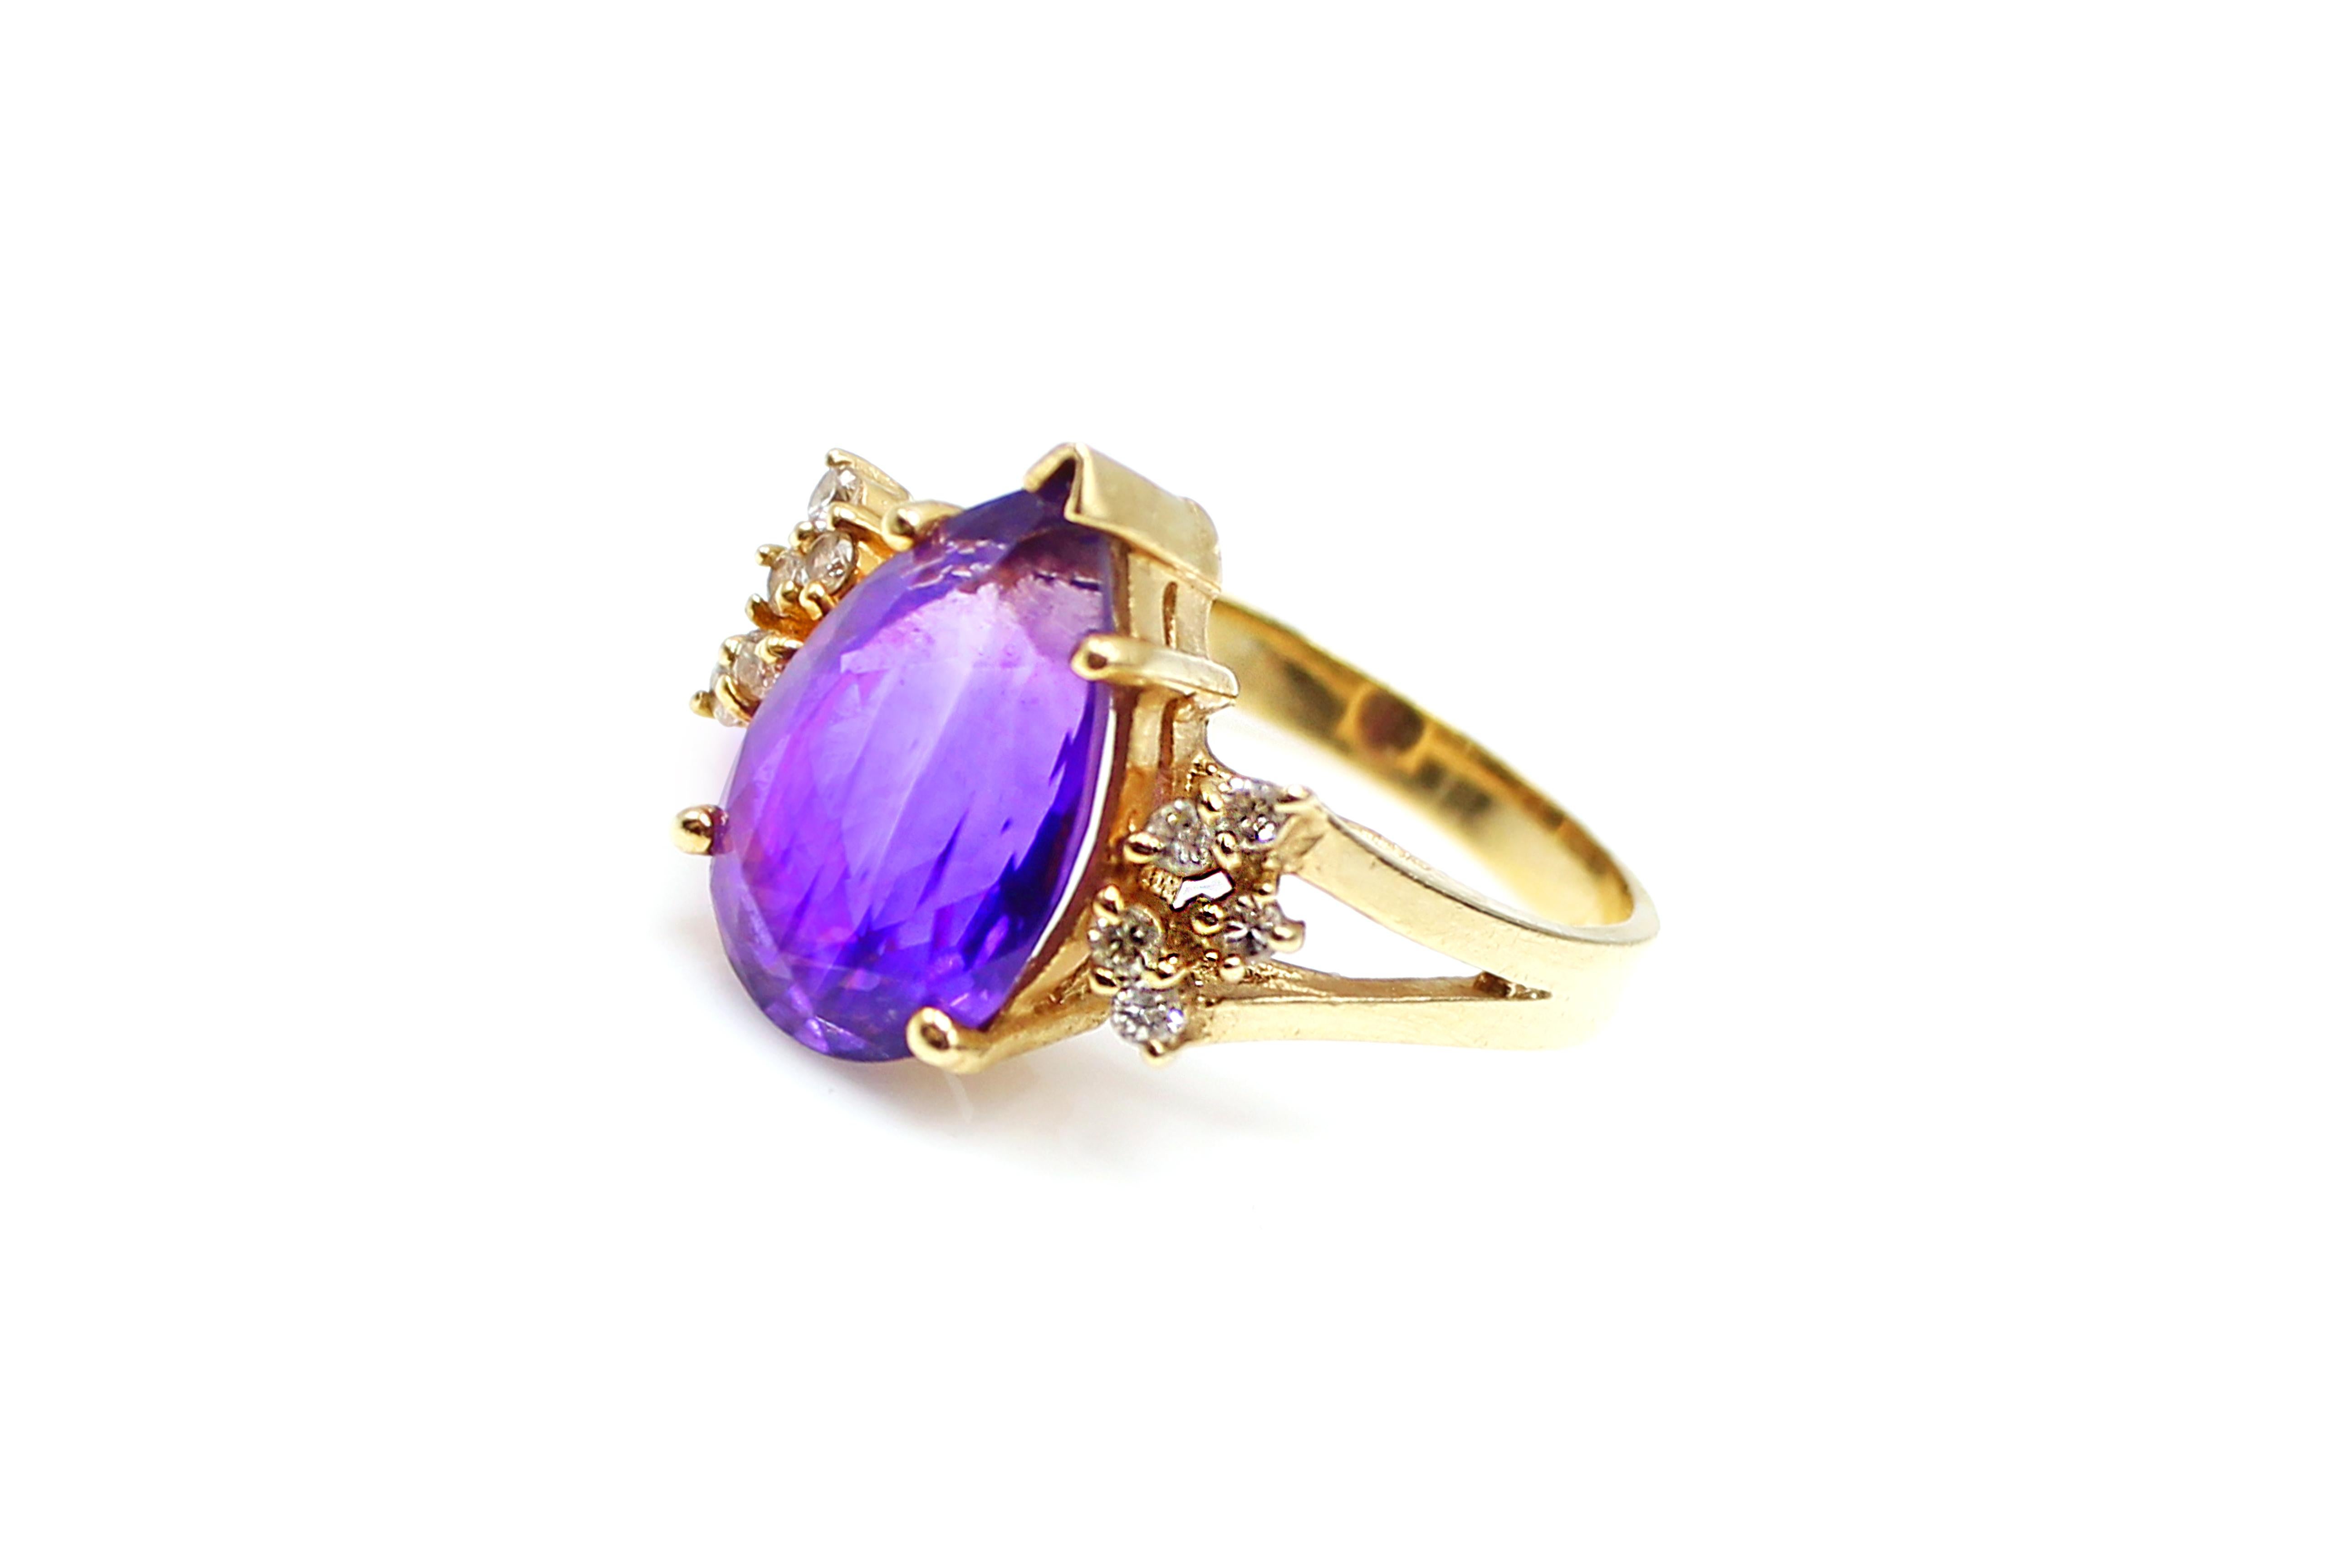 Beautiful and extremely well handcrafted ring from the 1960s, showcases an amazingly intense violet pear-shape Amethyst, measured to weigh approximately 3.50 carats. The Amethyst is held by 4 polished prongs and at the top. The split shank is